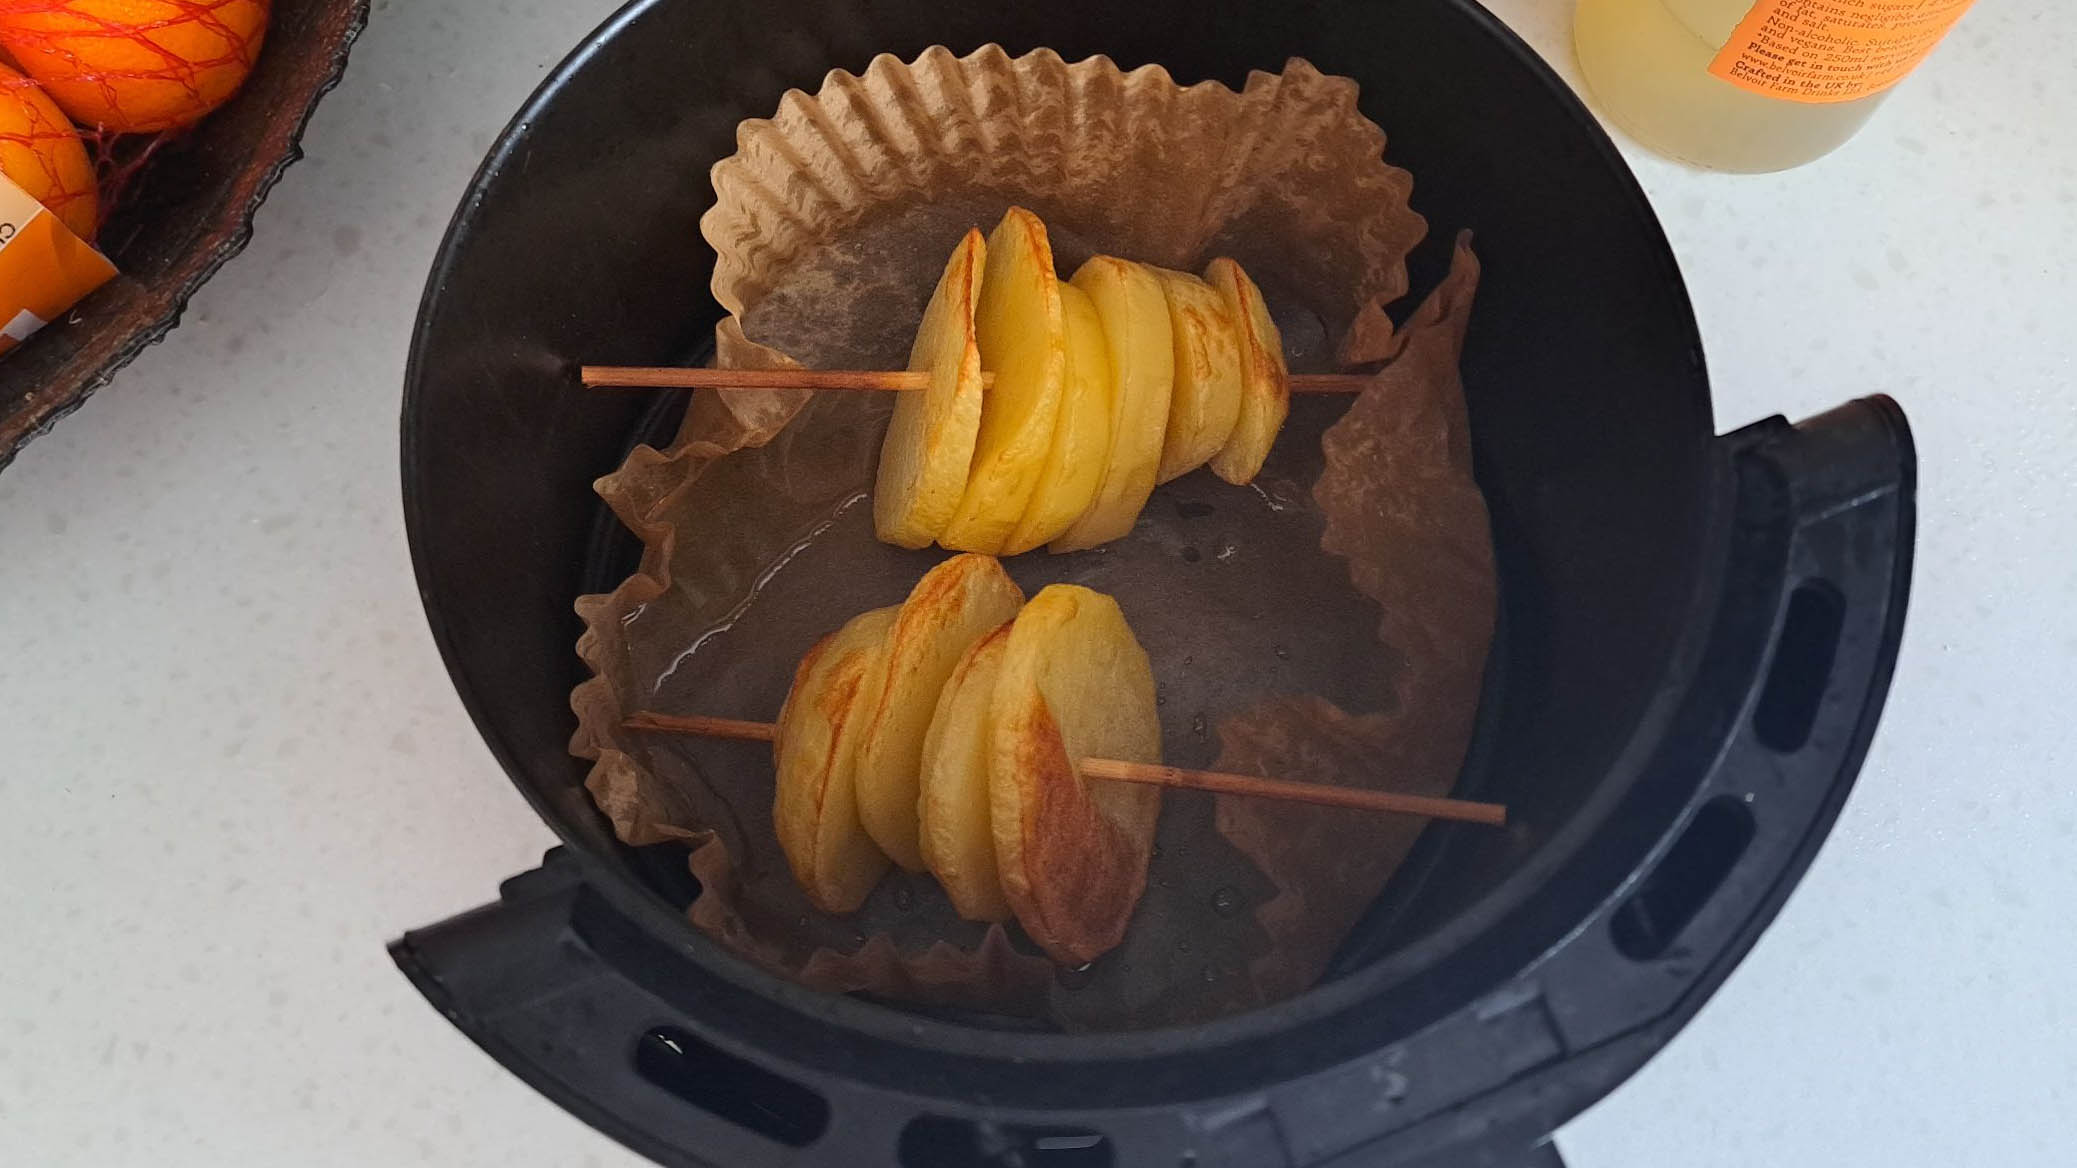 Cook potato trees in an air fryer